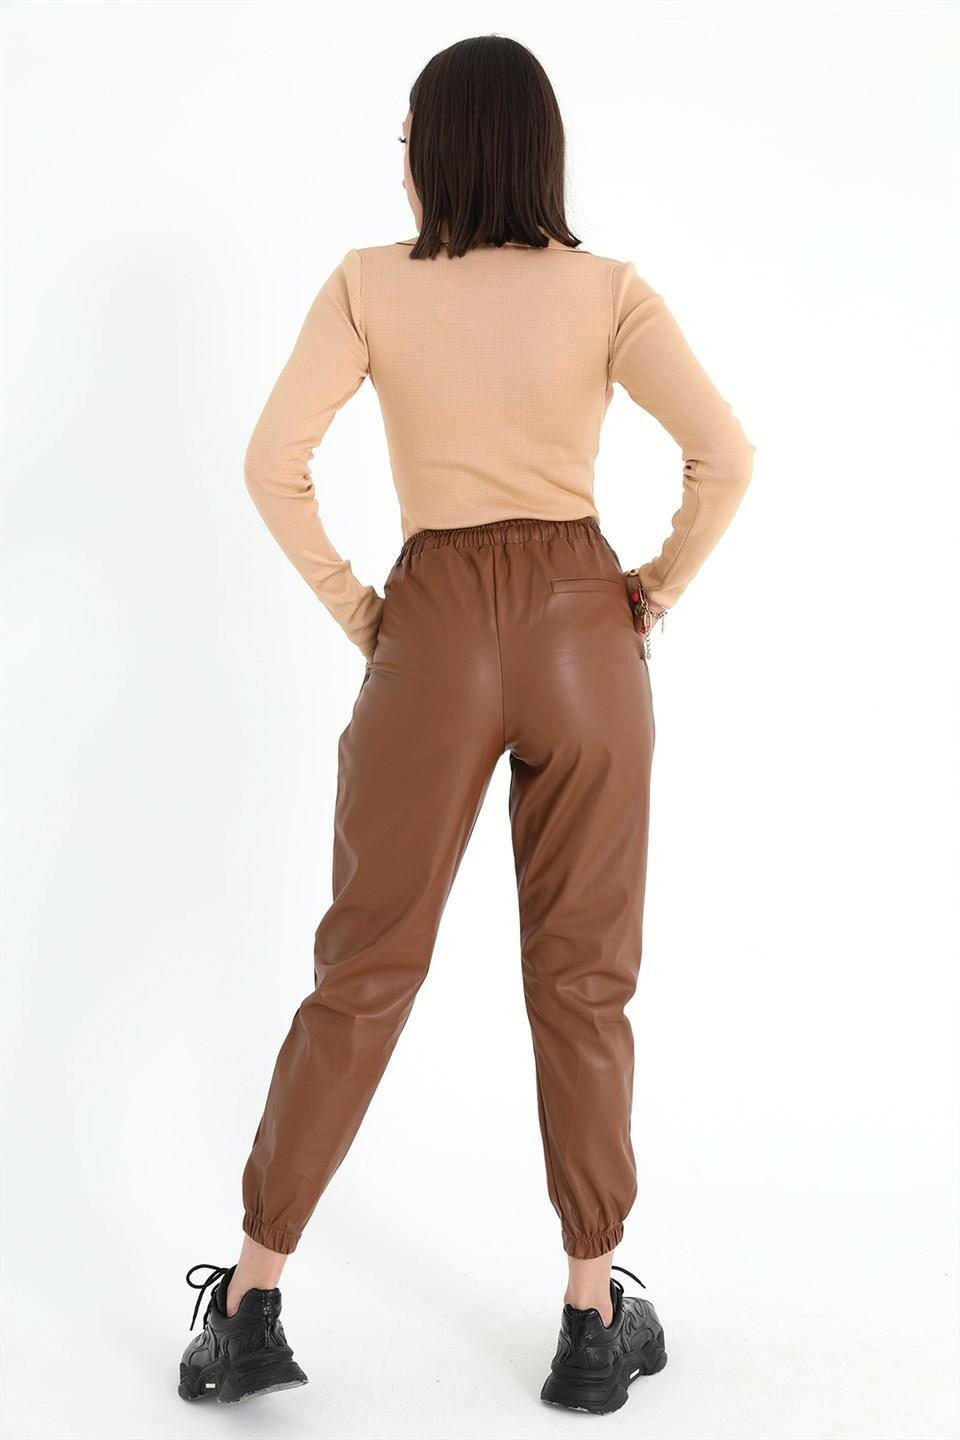 Women's Pleated Leather Pants with Elastic Waist and Elastic Legs - Tan - STREETMODE™ DE